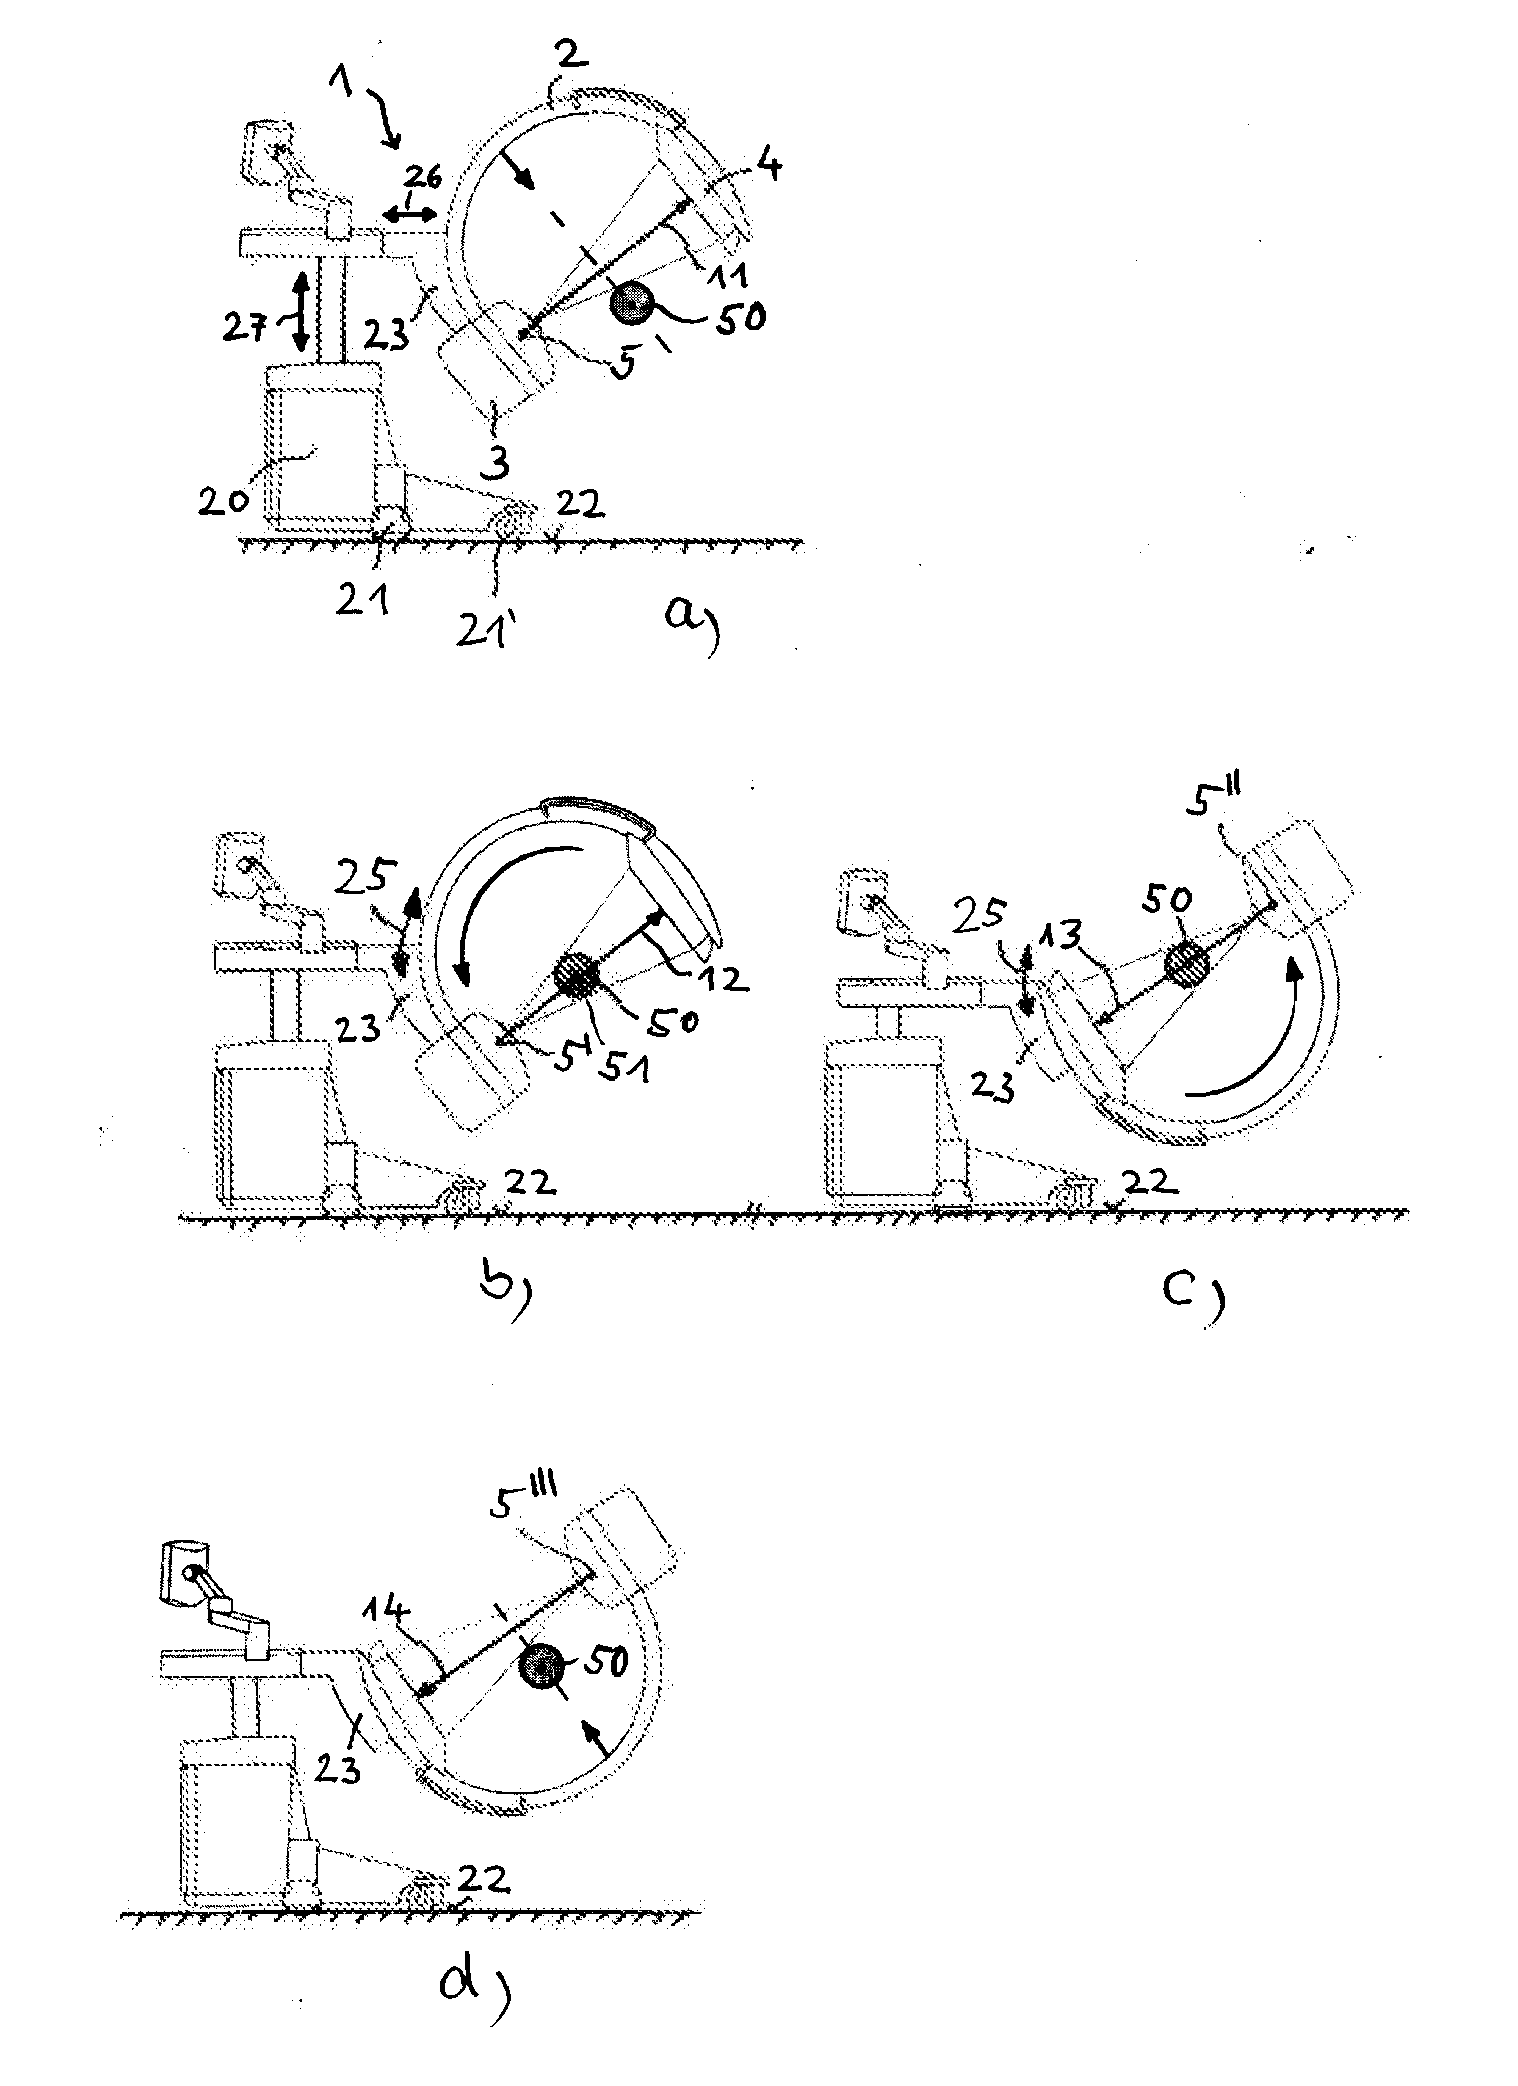 Method for recording a complete projection data set in the central layer for ct reconstruction using a c-arm x-ray apparatus with a limited rotation range